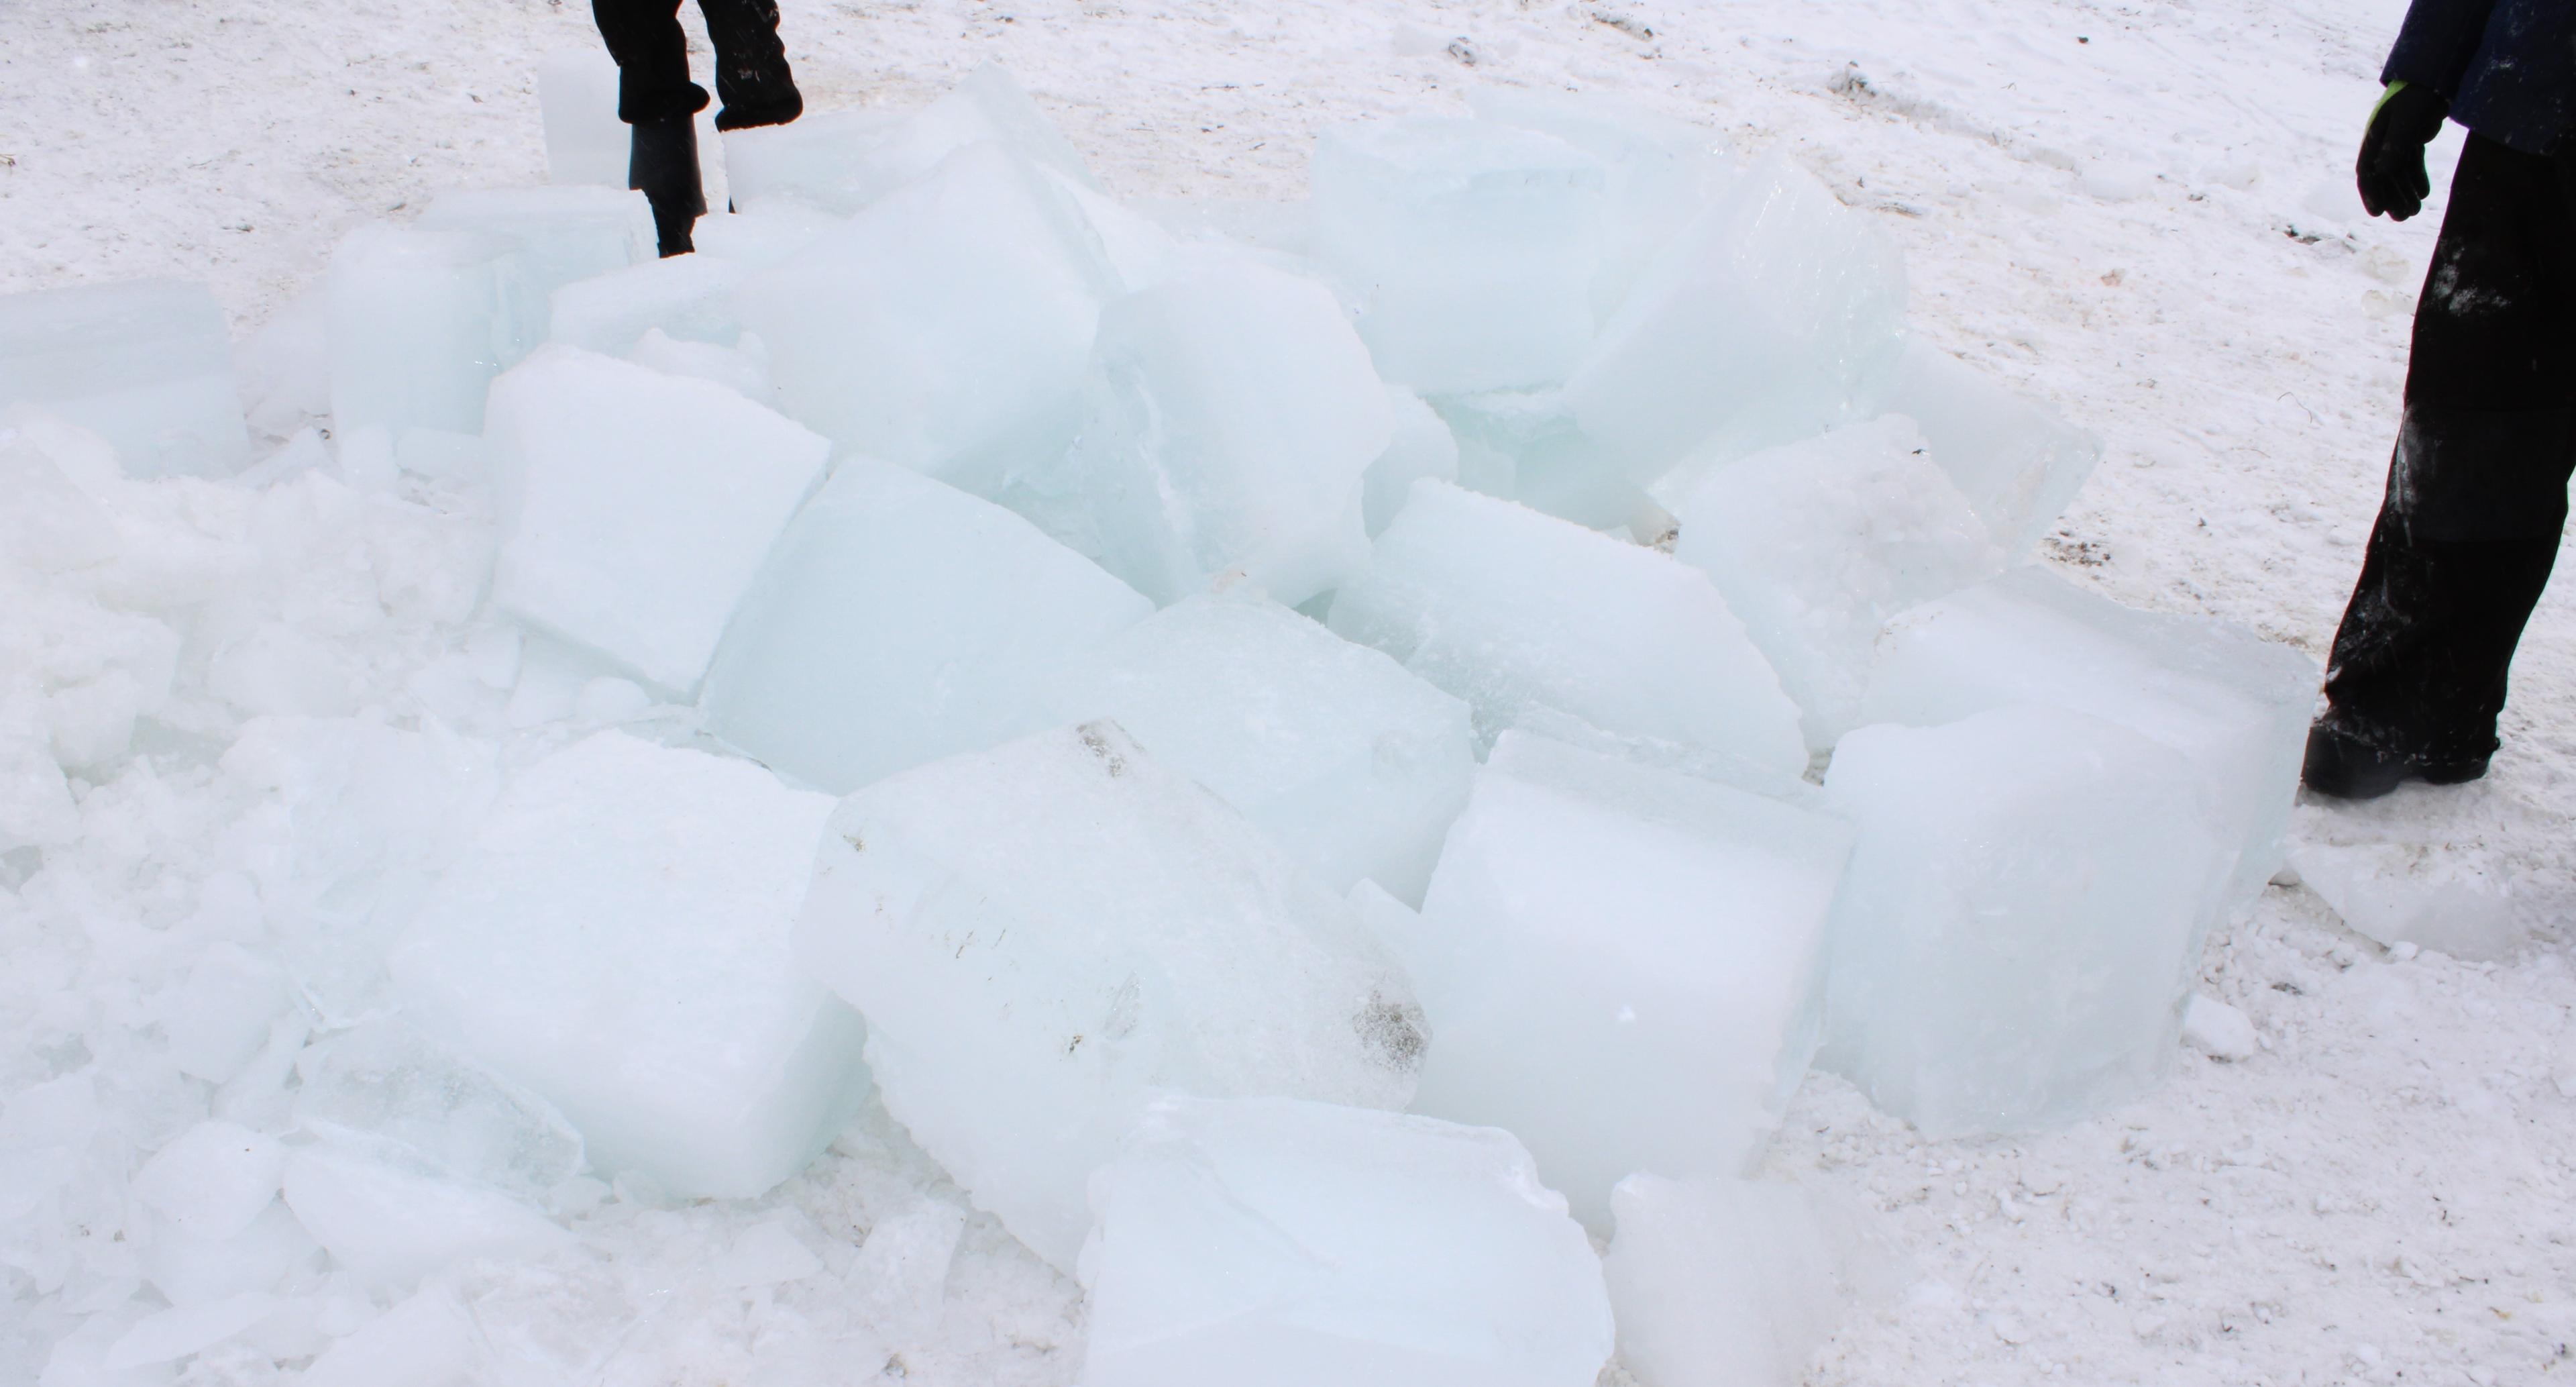 Men stand by a pile of ice blocks.